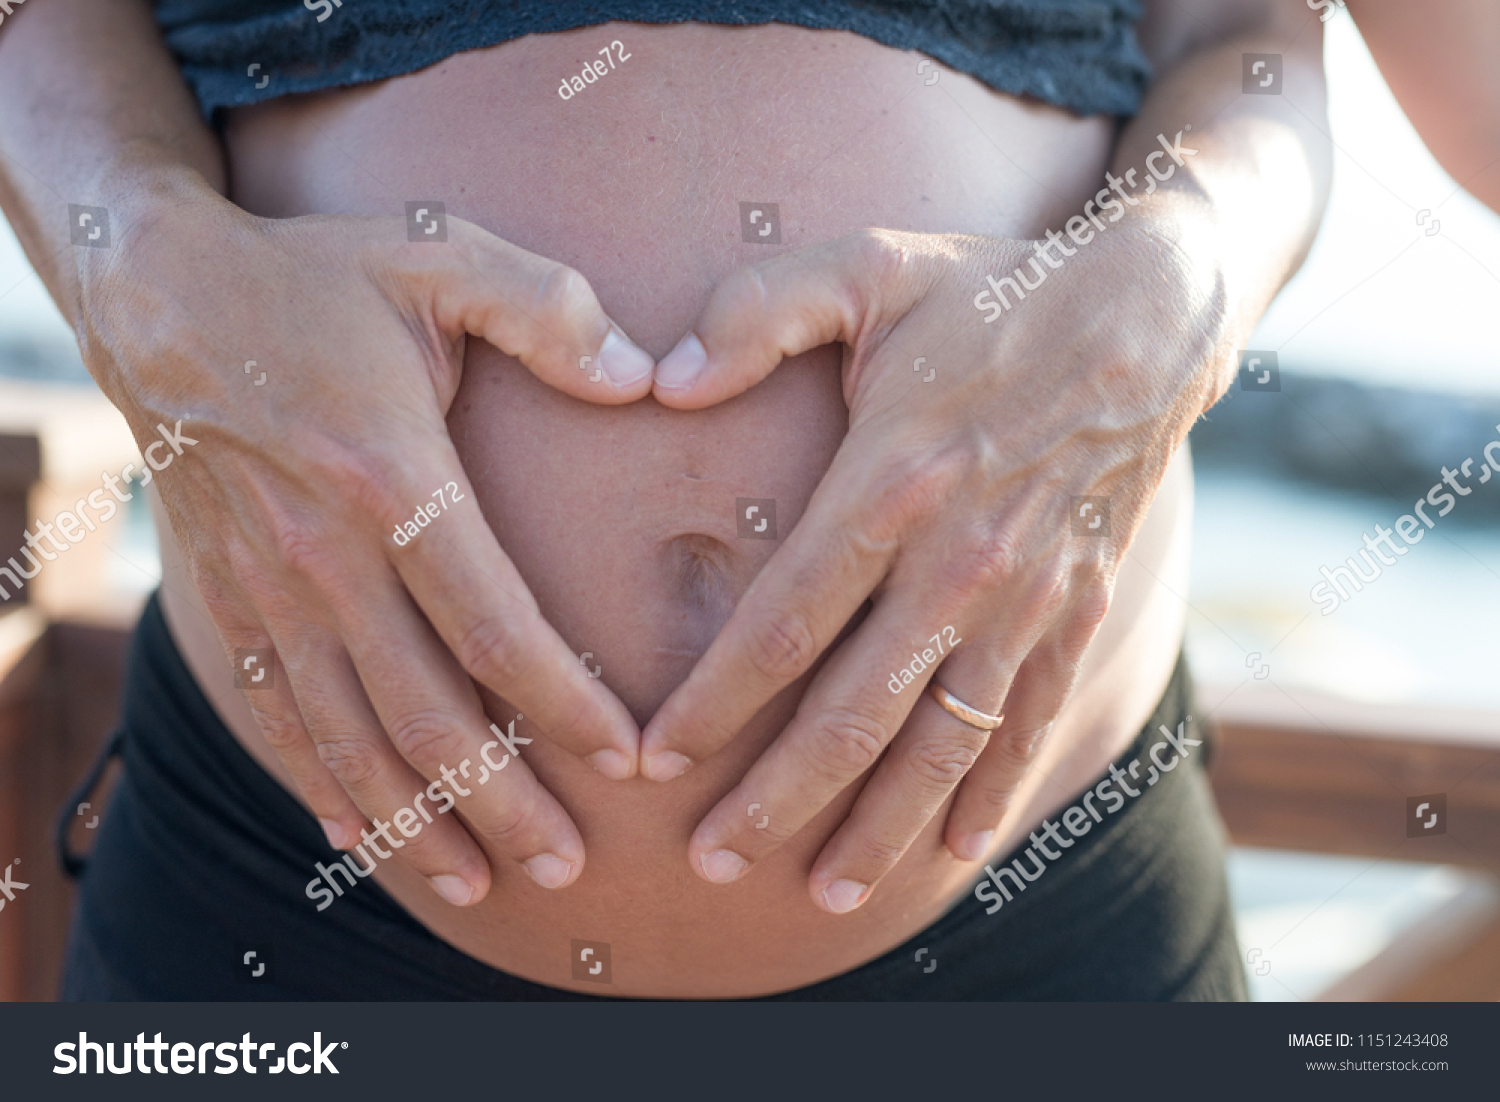 Pregnant woman on the beach - hands of the husband in heart shape on belly. #1151243408